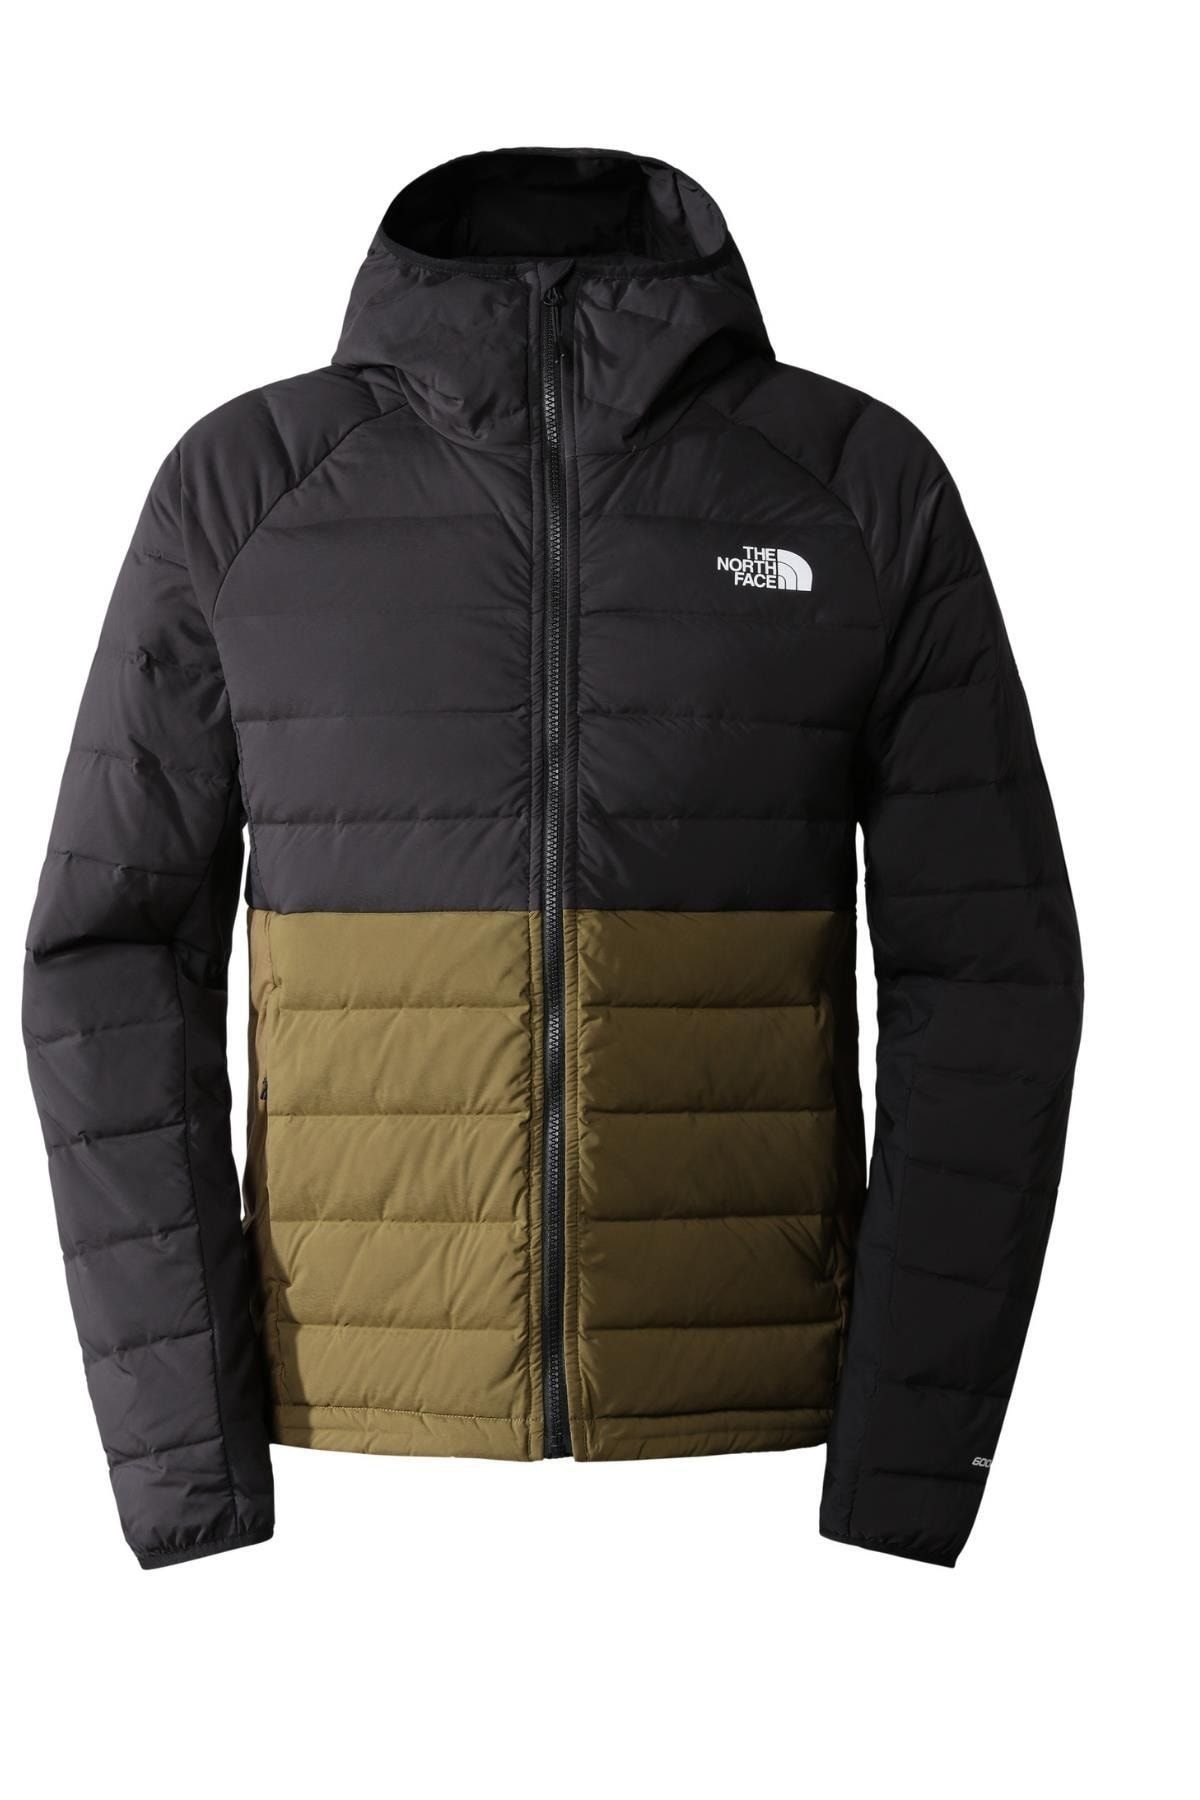 The North Face Belleview Stretch Down Hoodie Mont Erkek Siyah